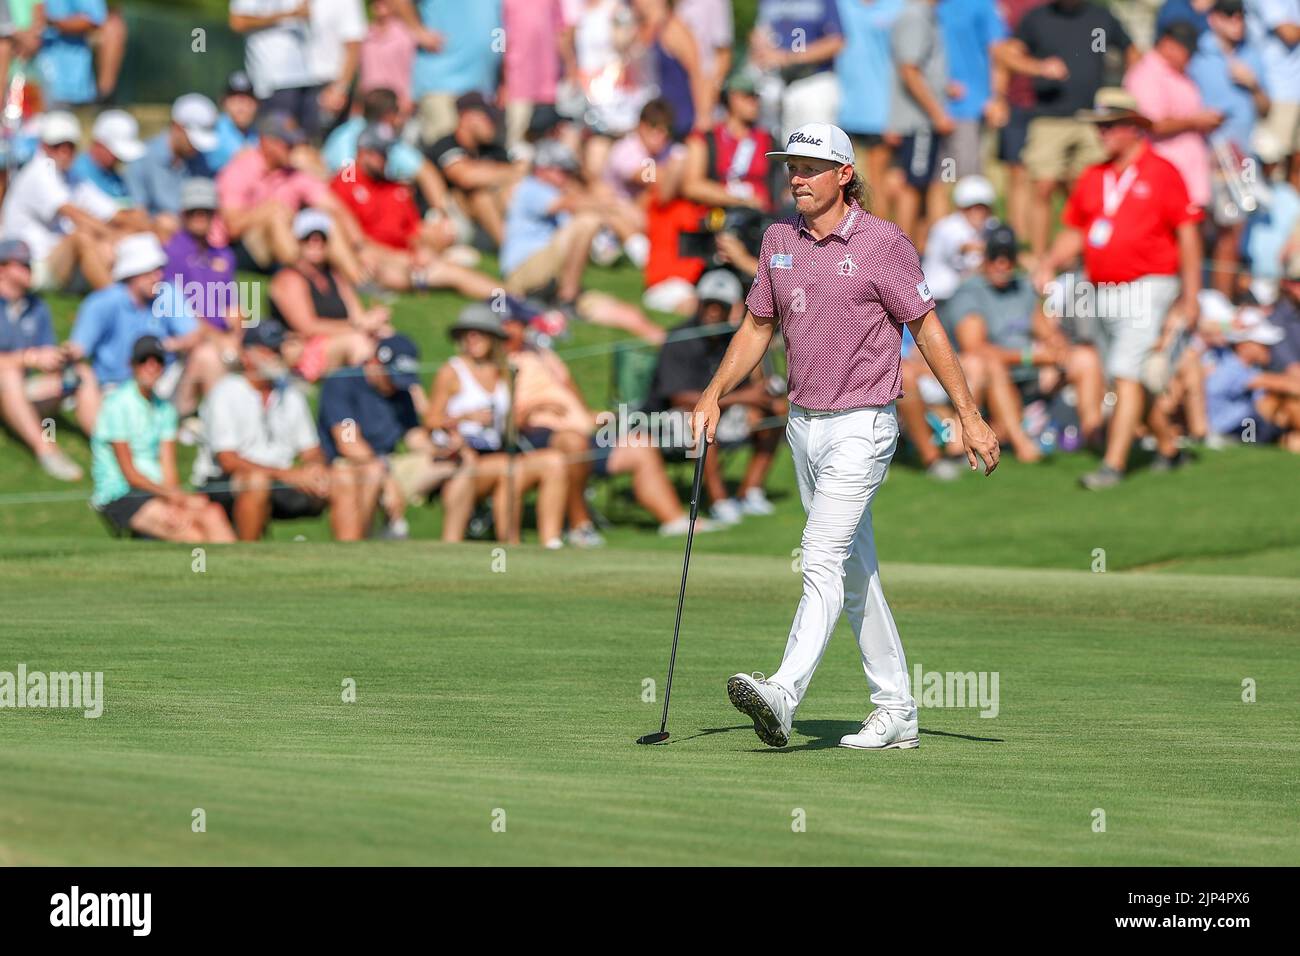 August 14, 2022: Cameron Smith approaches the 18th green during the final round of the FedEx St. Jude Championship golf tournament at TPC Southwind in Memphis, TN. Gray Siegel/Cal Sport Media Stock Photo